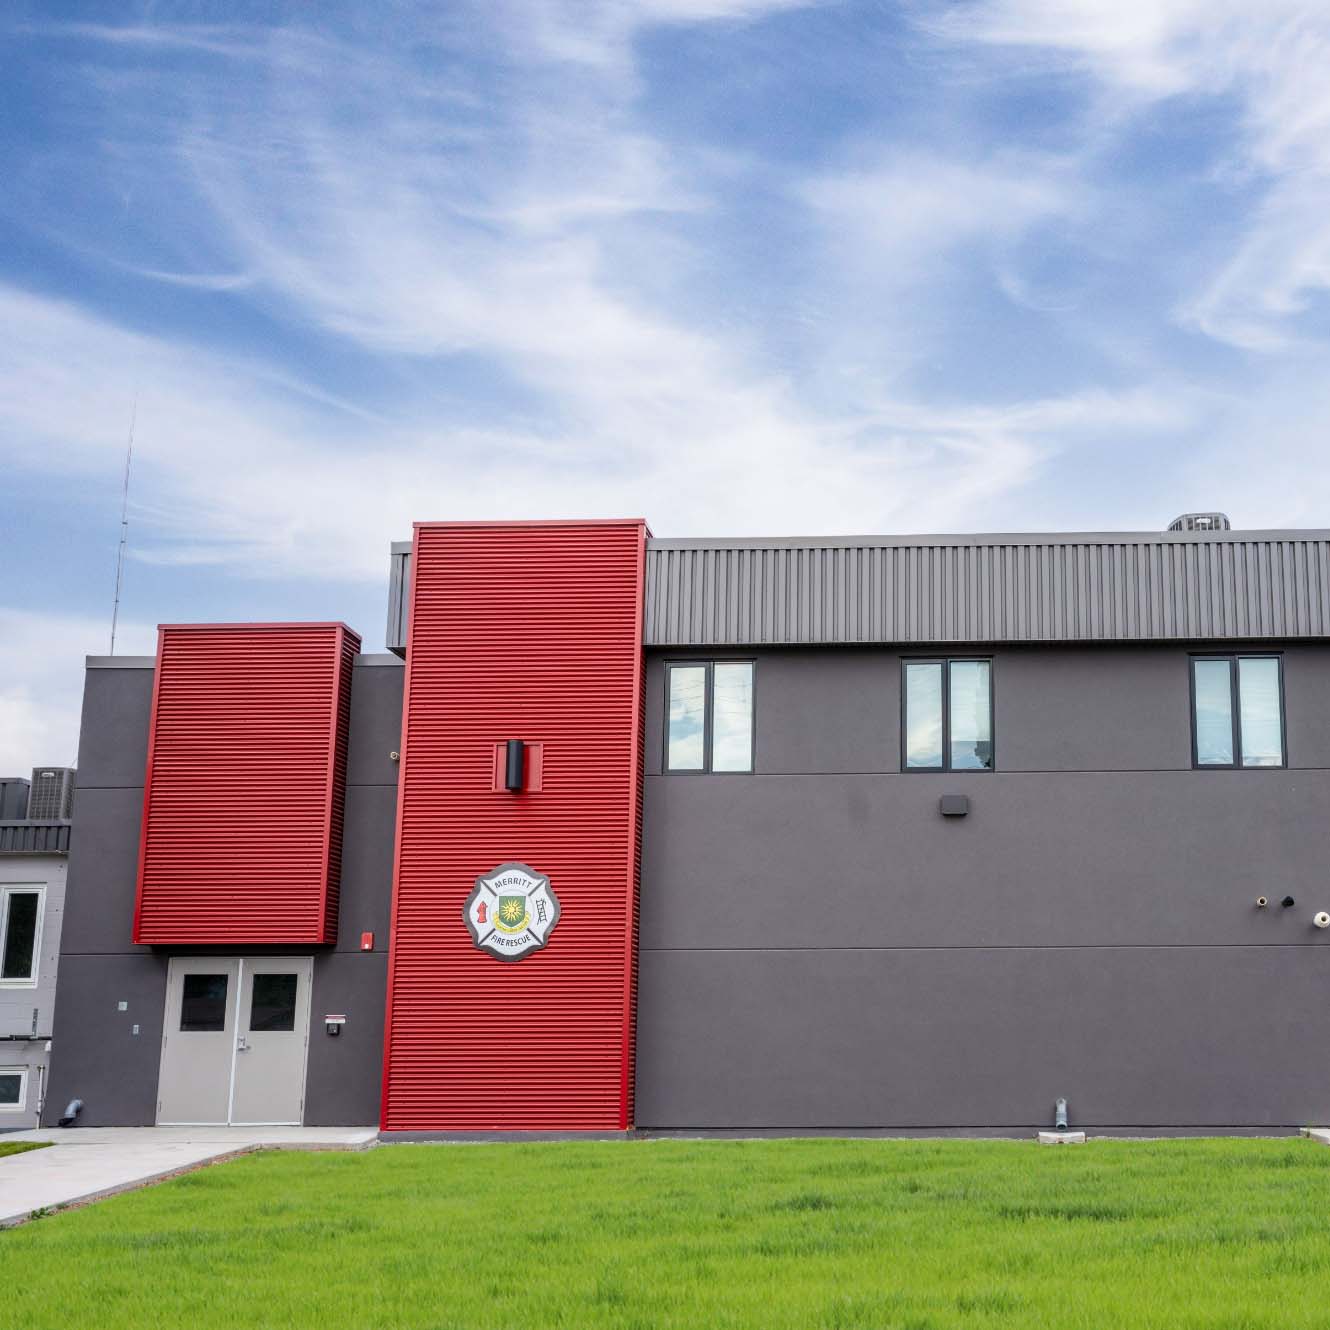 The red and grey exterior of the Merritt Firehall with a cloudy blue sky in the background.